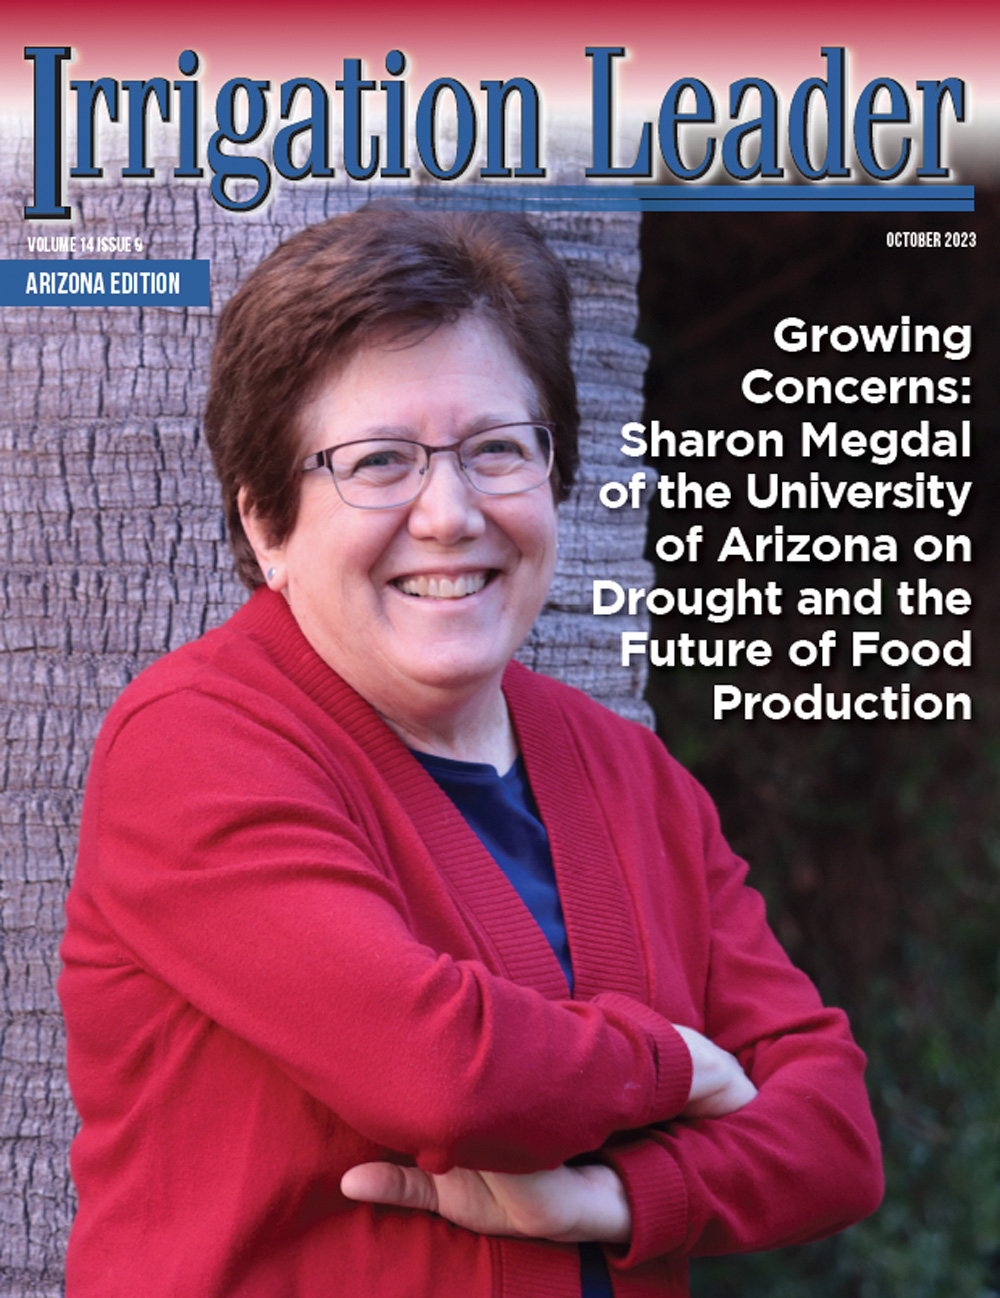 Cover of Irrigation Leader magazine featuring Dr. Sharon Megdal